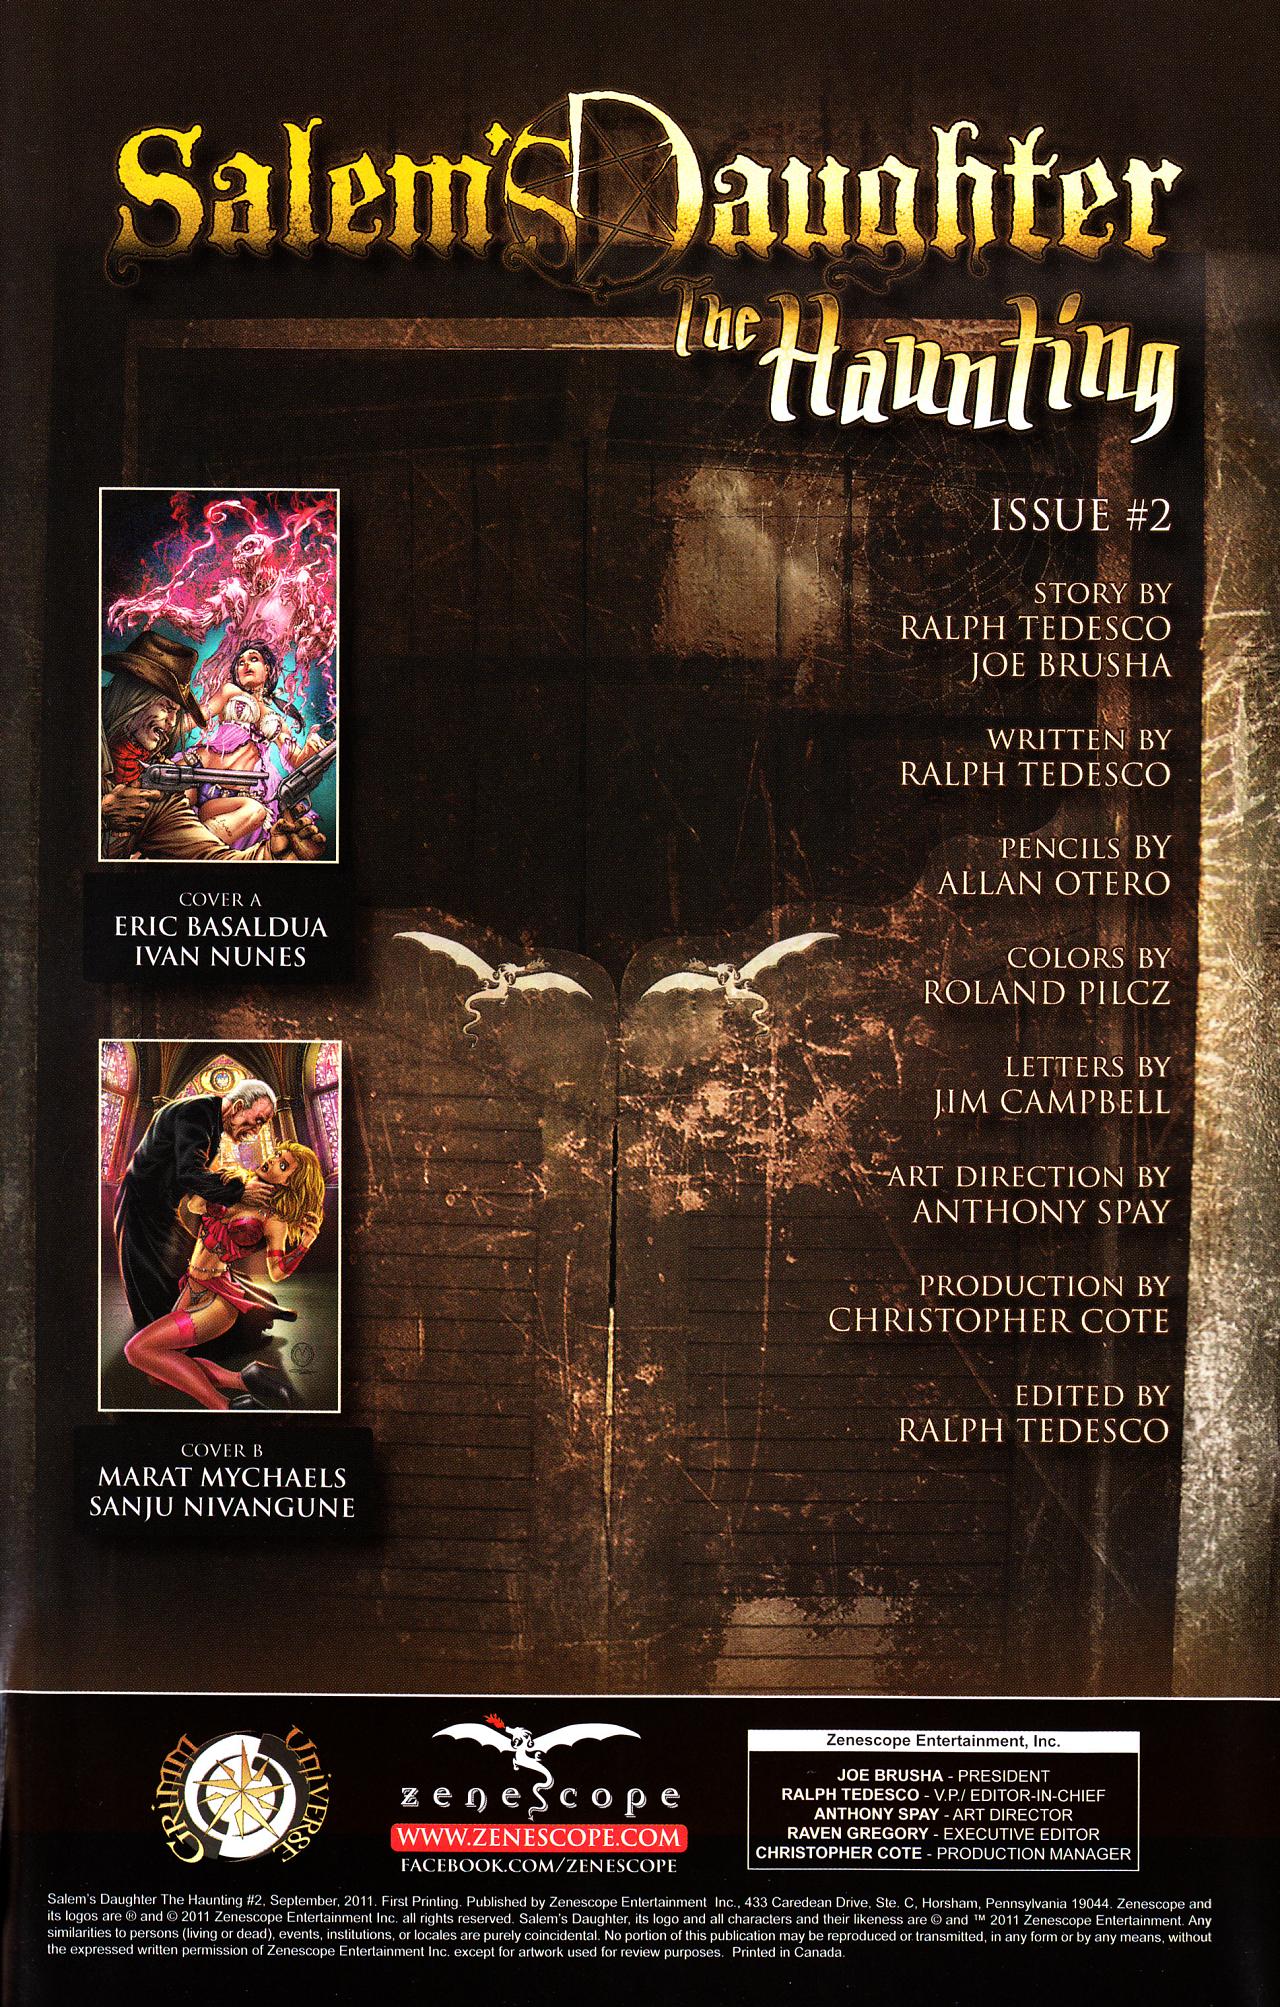 Read online Salem's Daughter: The Haunting comic -  Issue #2 - 3